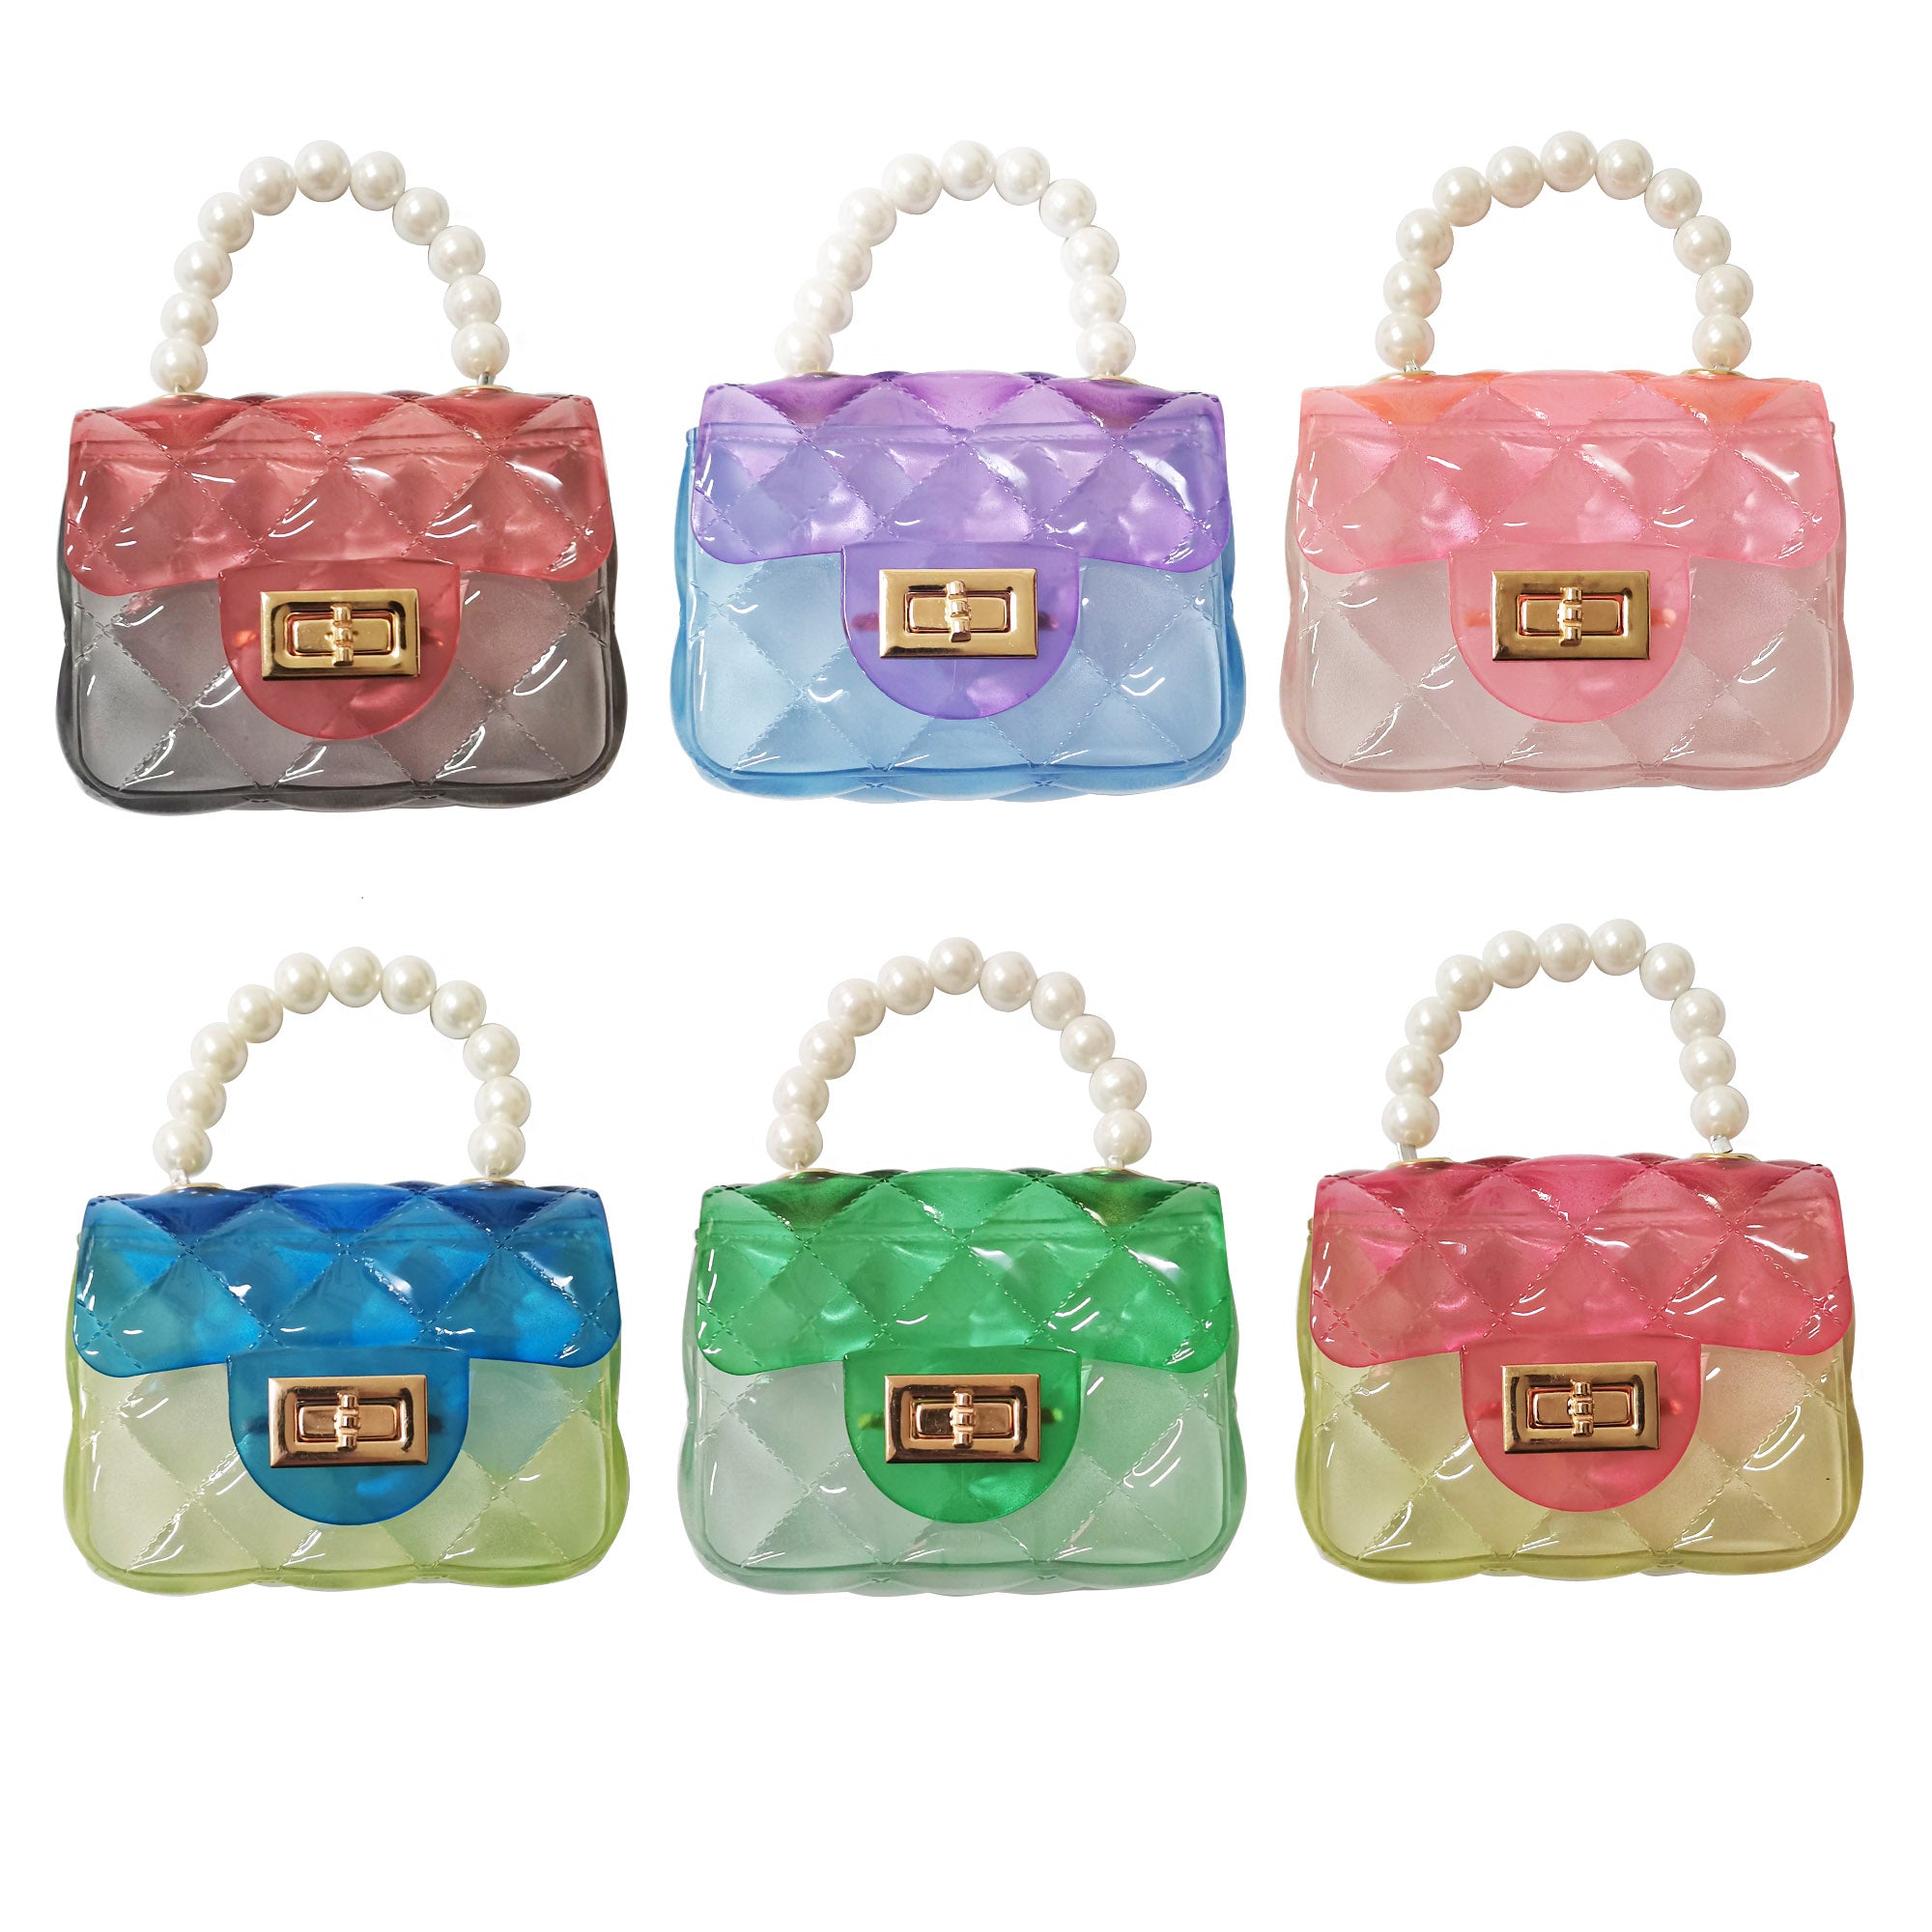 CLEAR OMBRE QUILTED MINI JELLY PURSE 3113-23 (12PC)